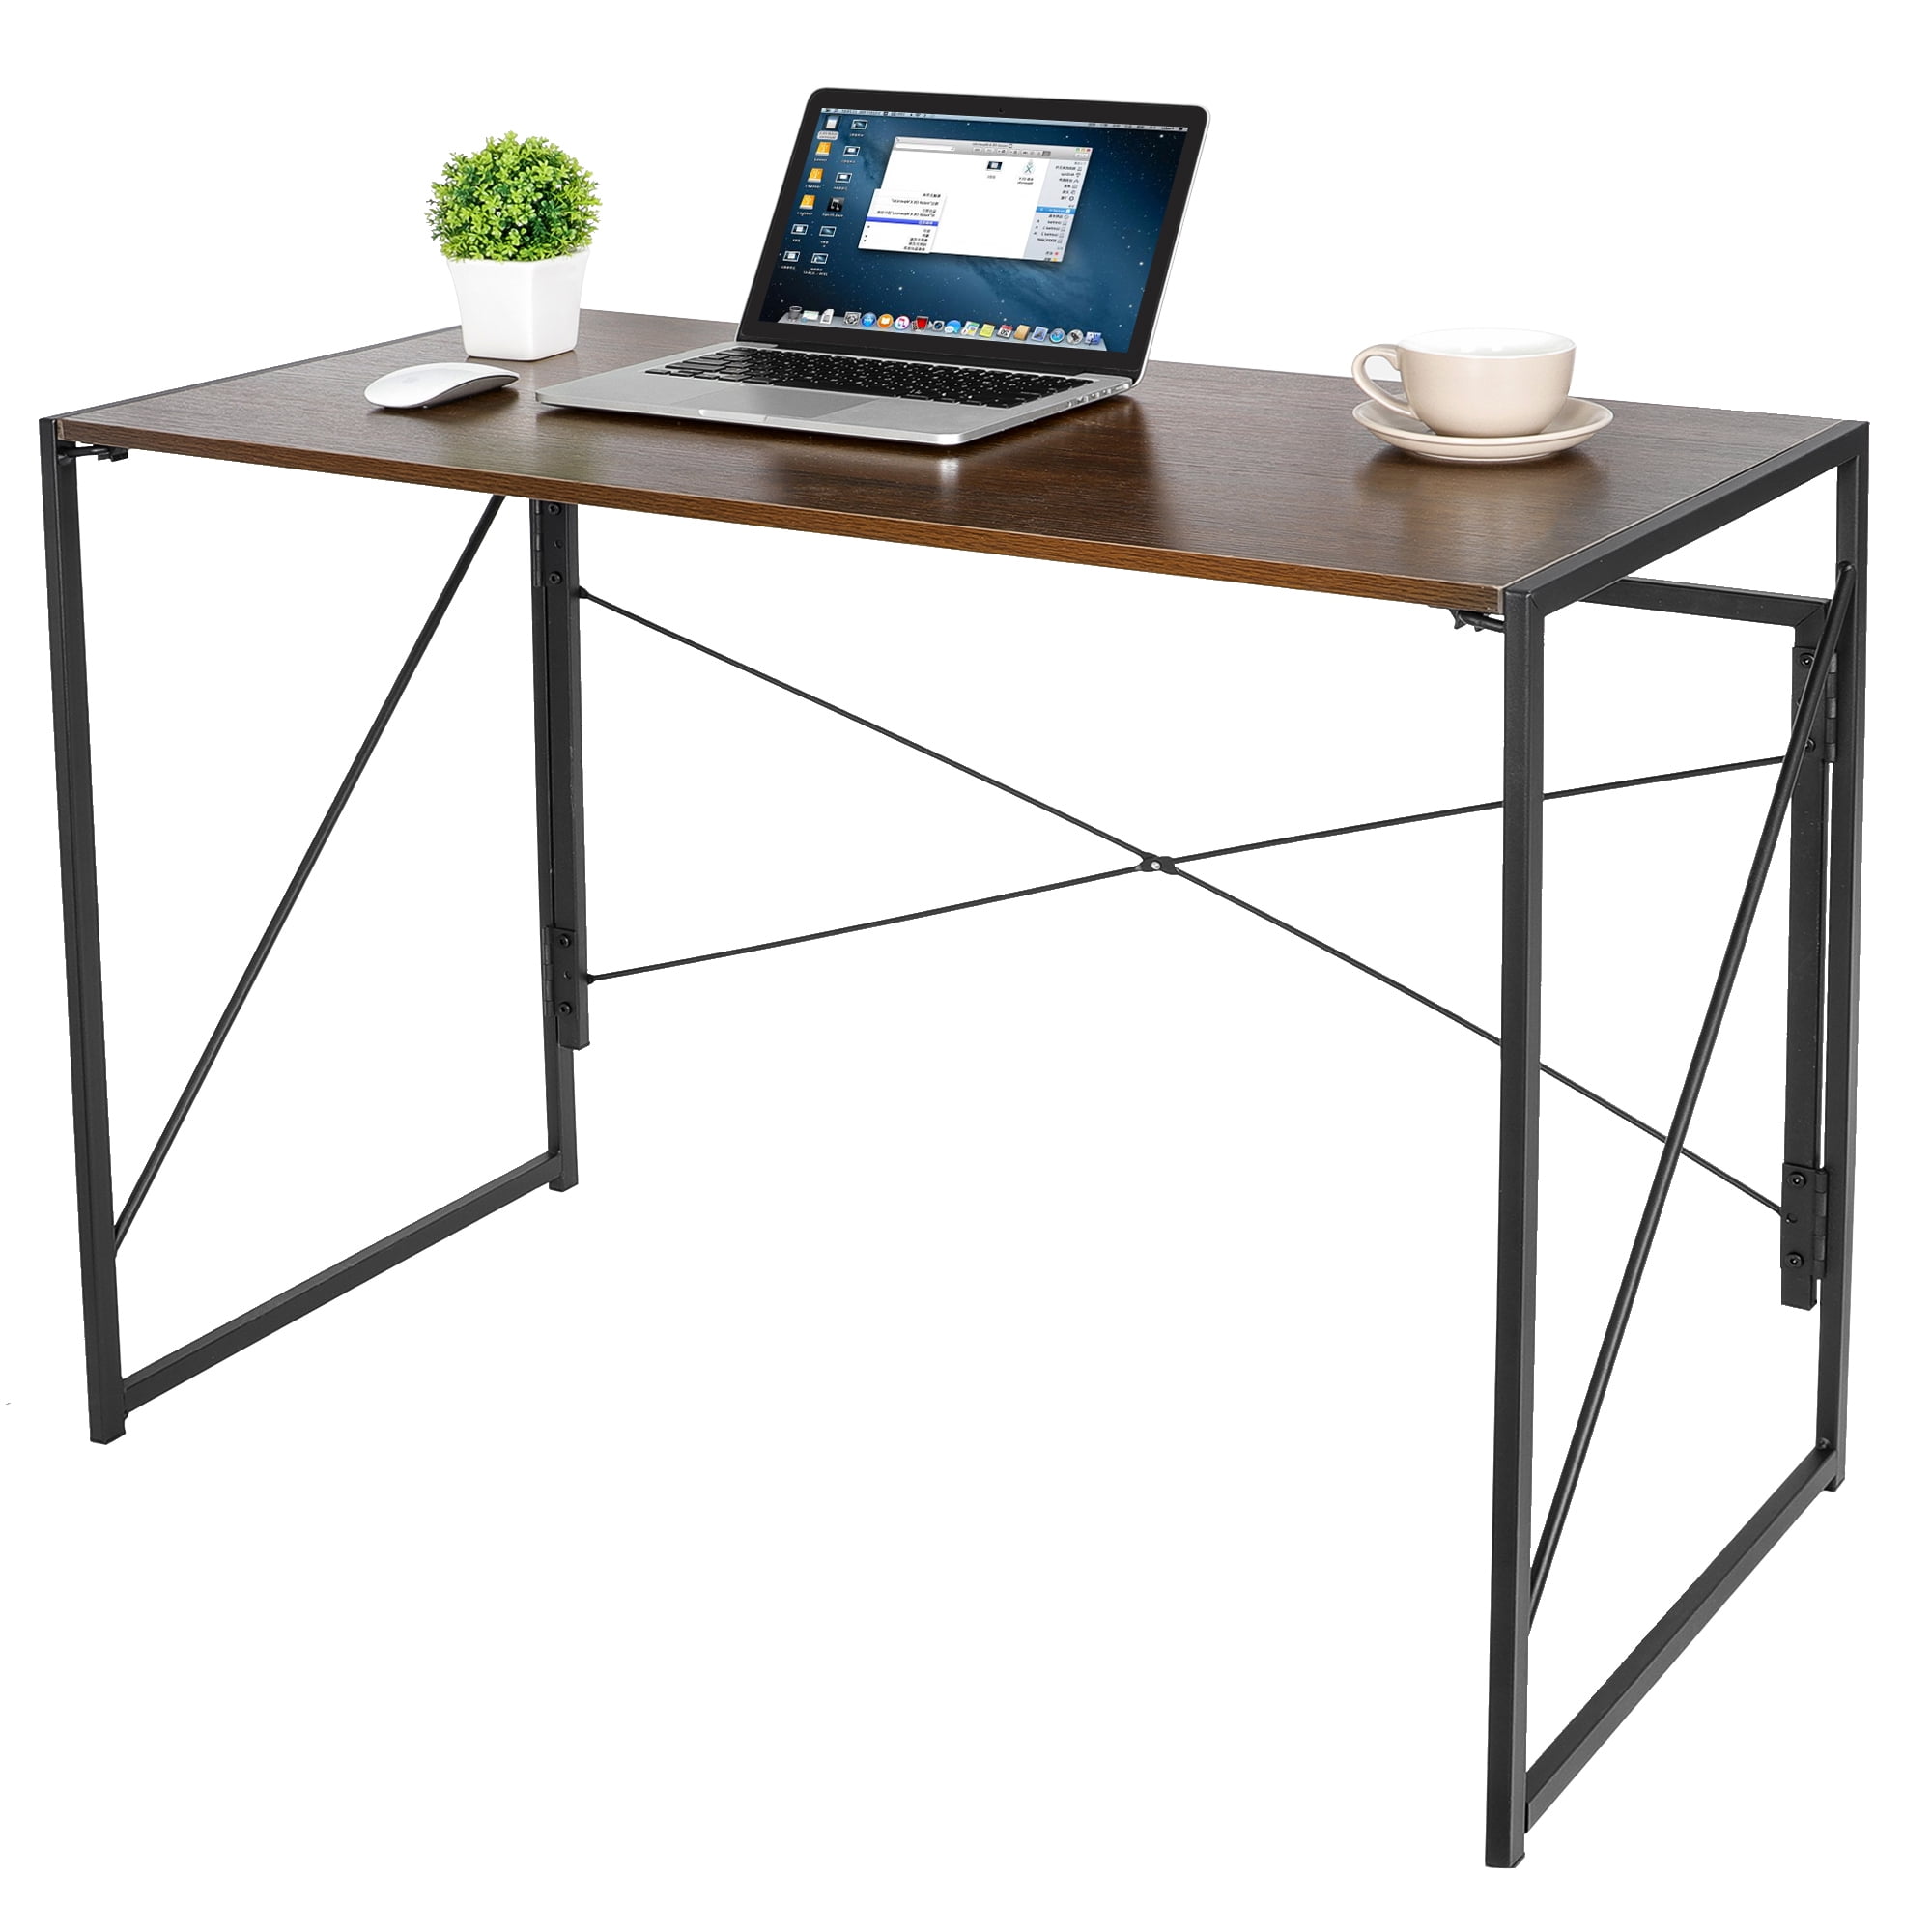 Folding Table Computer Desk Office Portable Work Table white/blue 